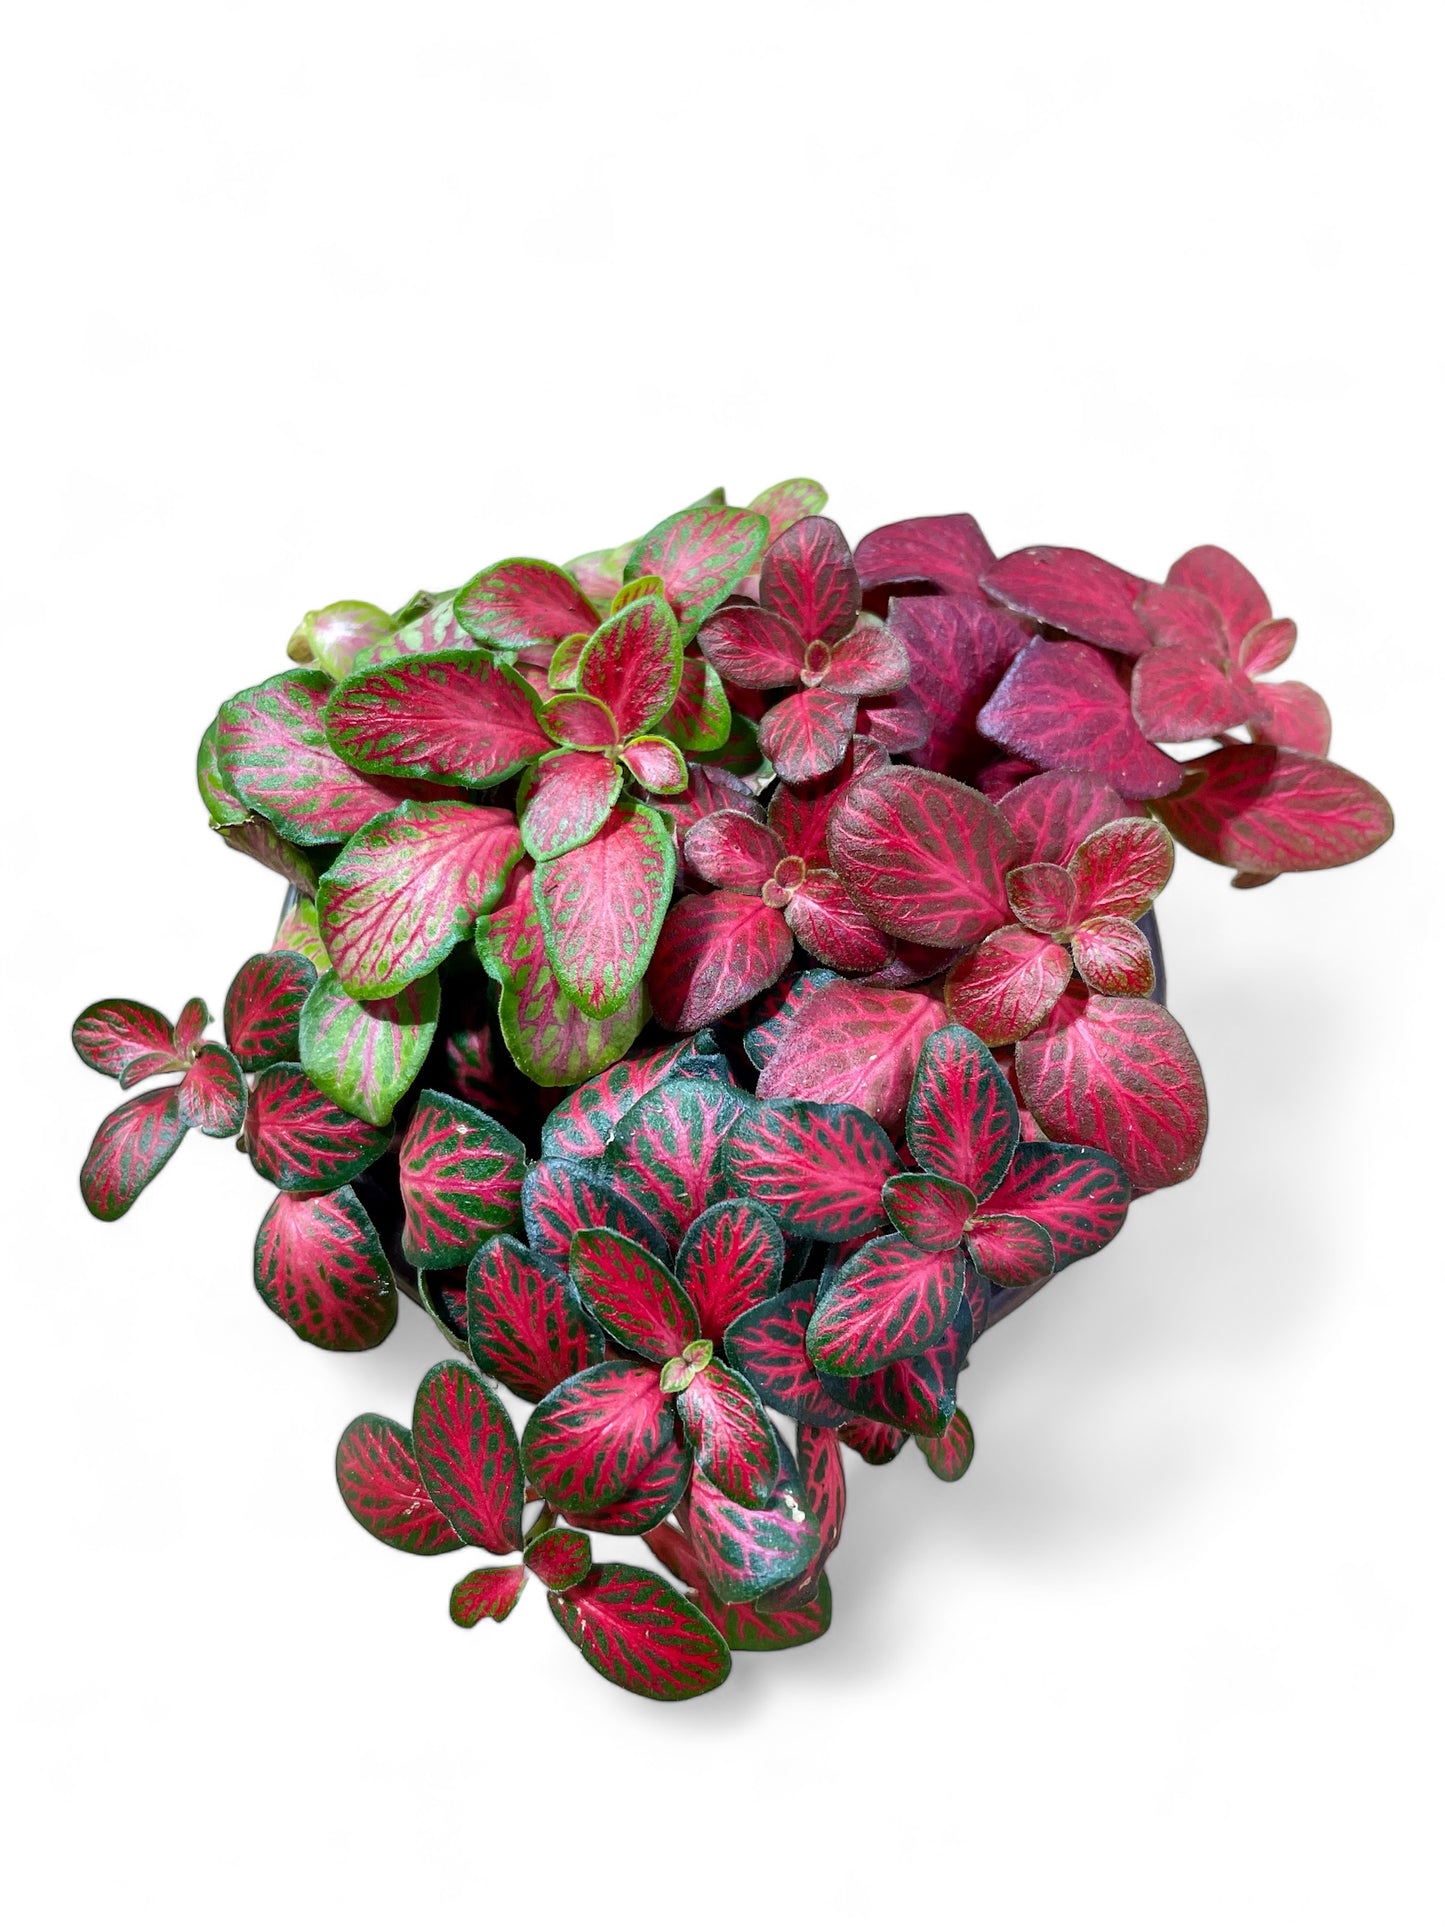 Fittonia mixte "Red Trifecta" - F. albivenis 'Ruby Green, Mini Red, Flame Red'